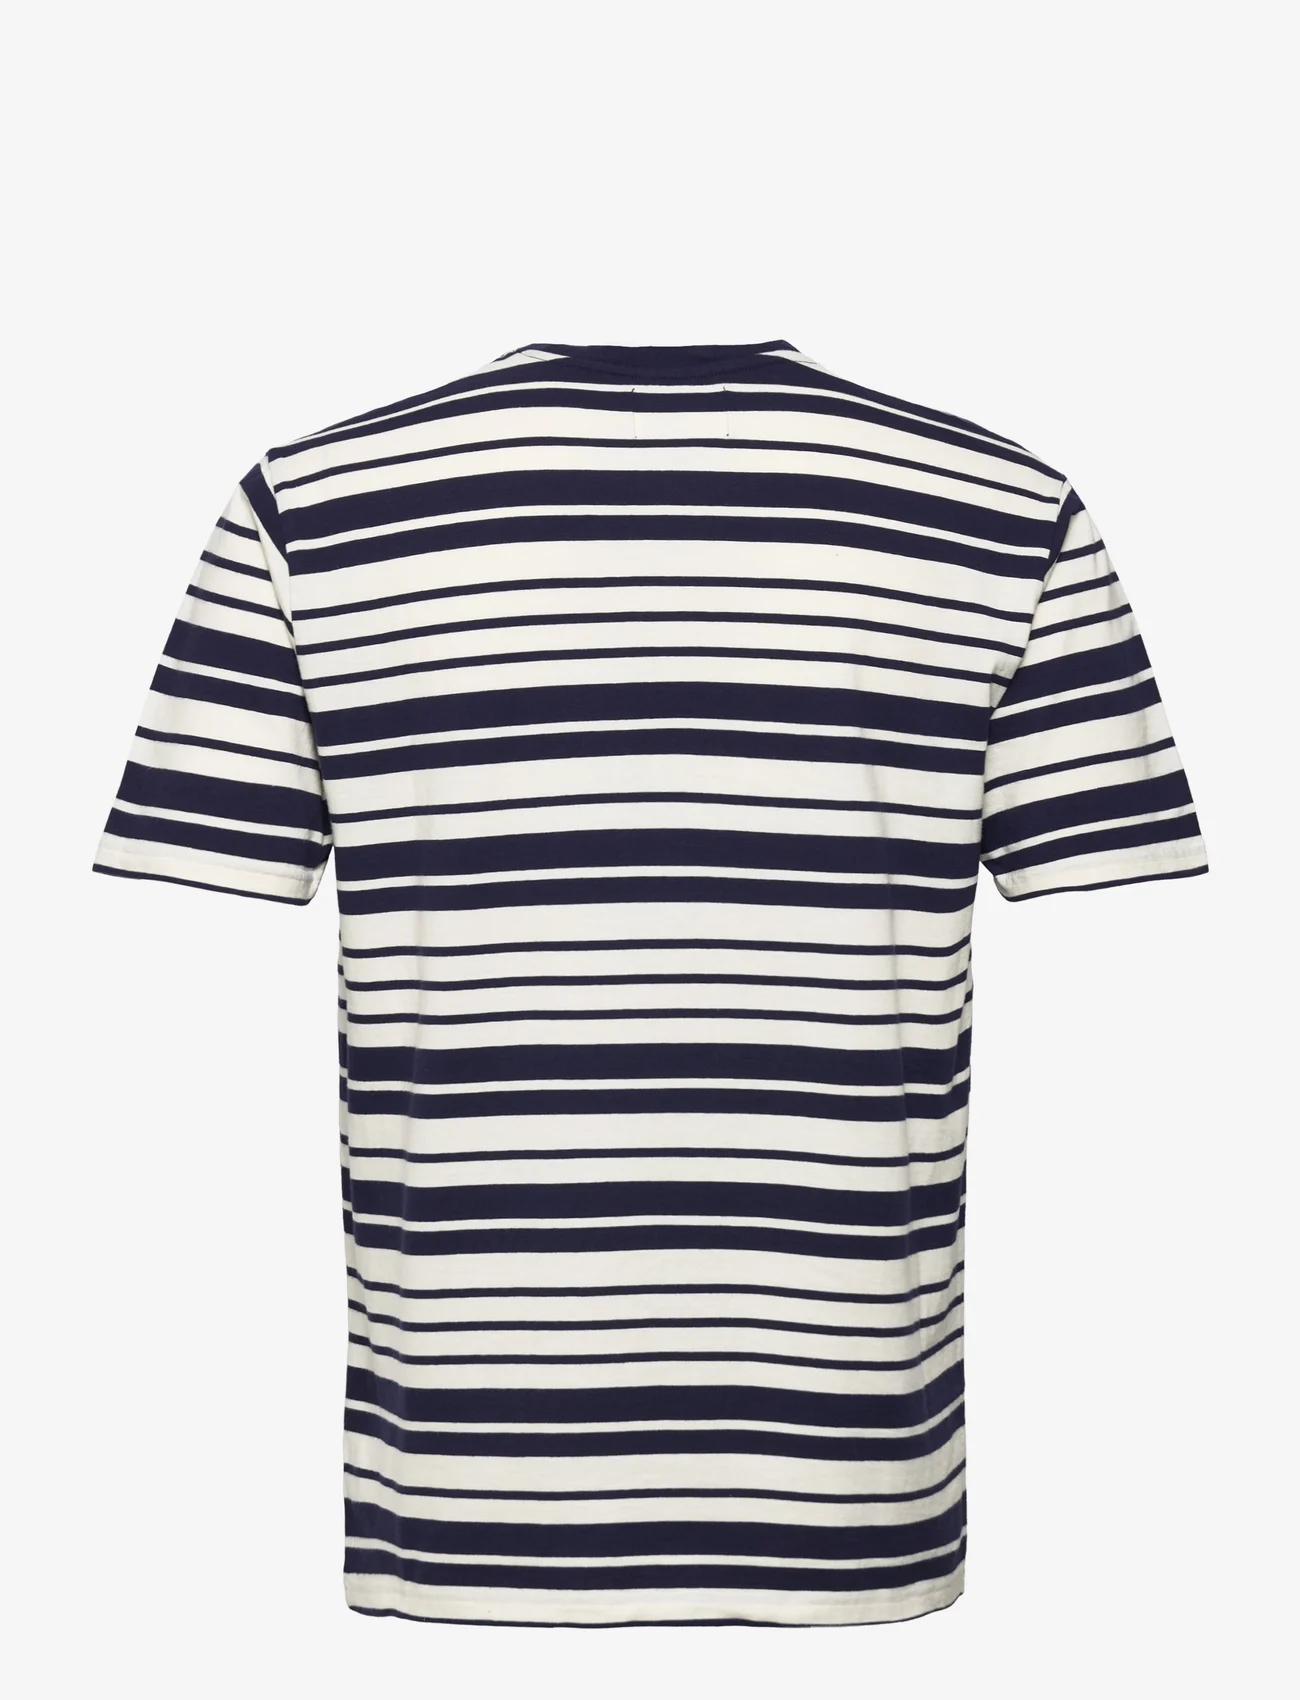 Double A by Wood Wood - Ace stripe T-shirt - short-sleeved t-shirts - off-white/navy stripes - 1